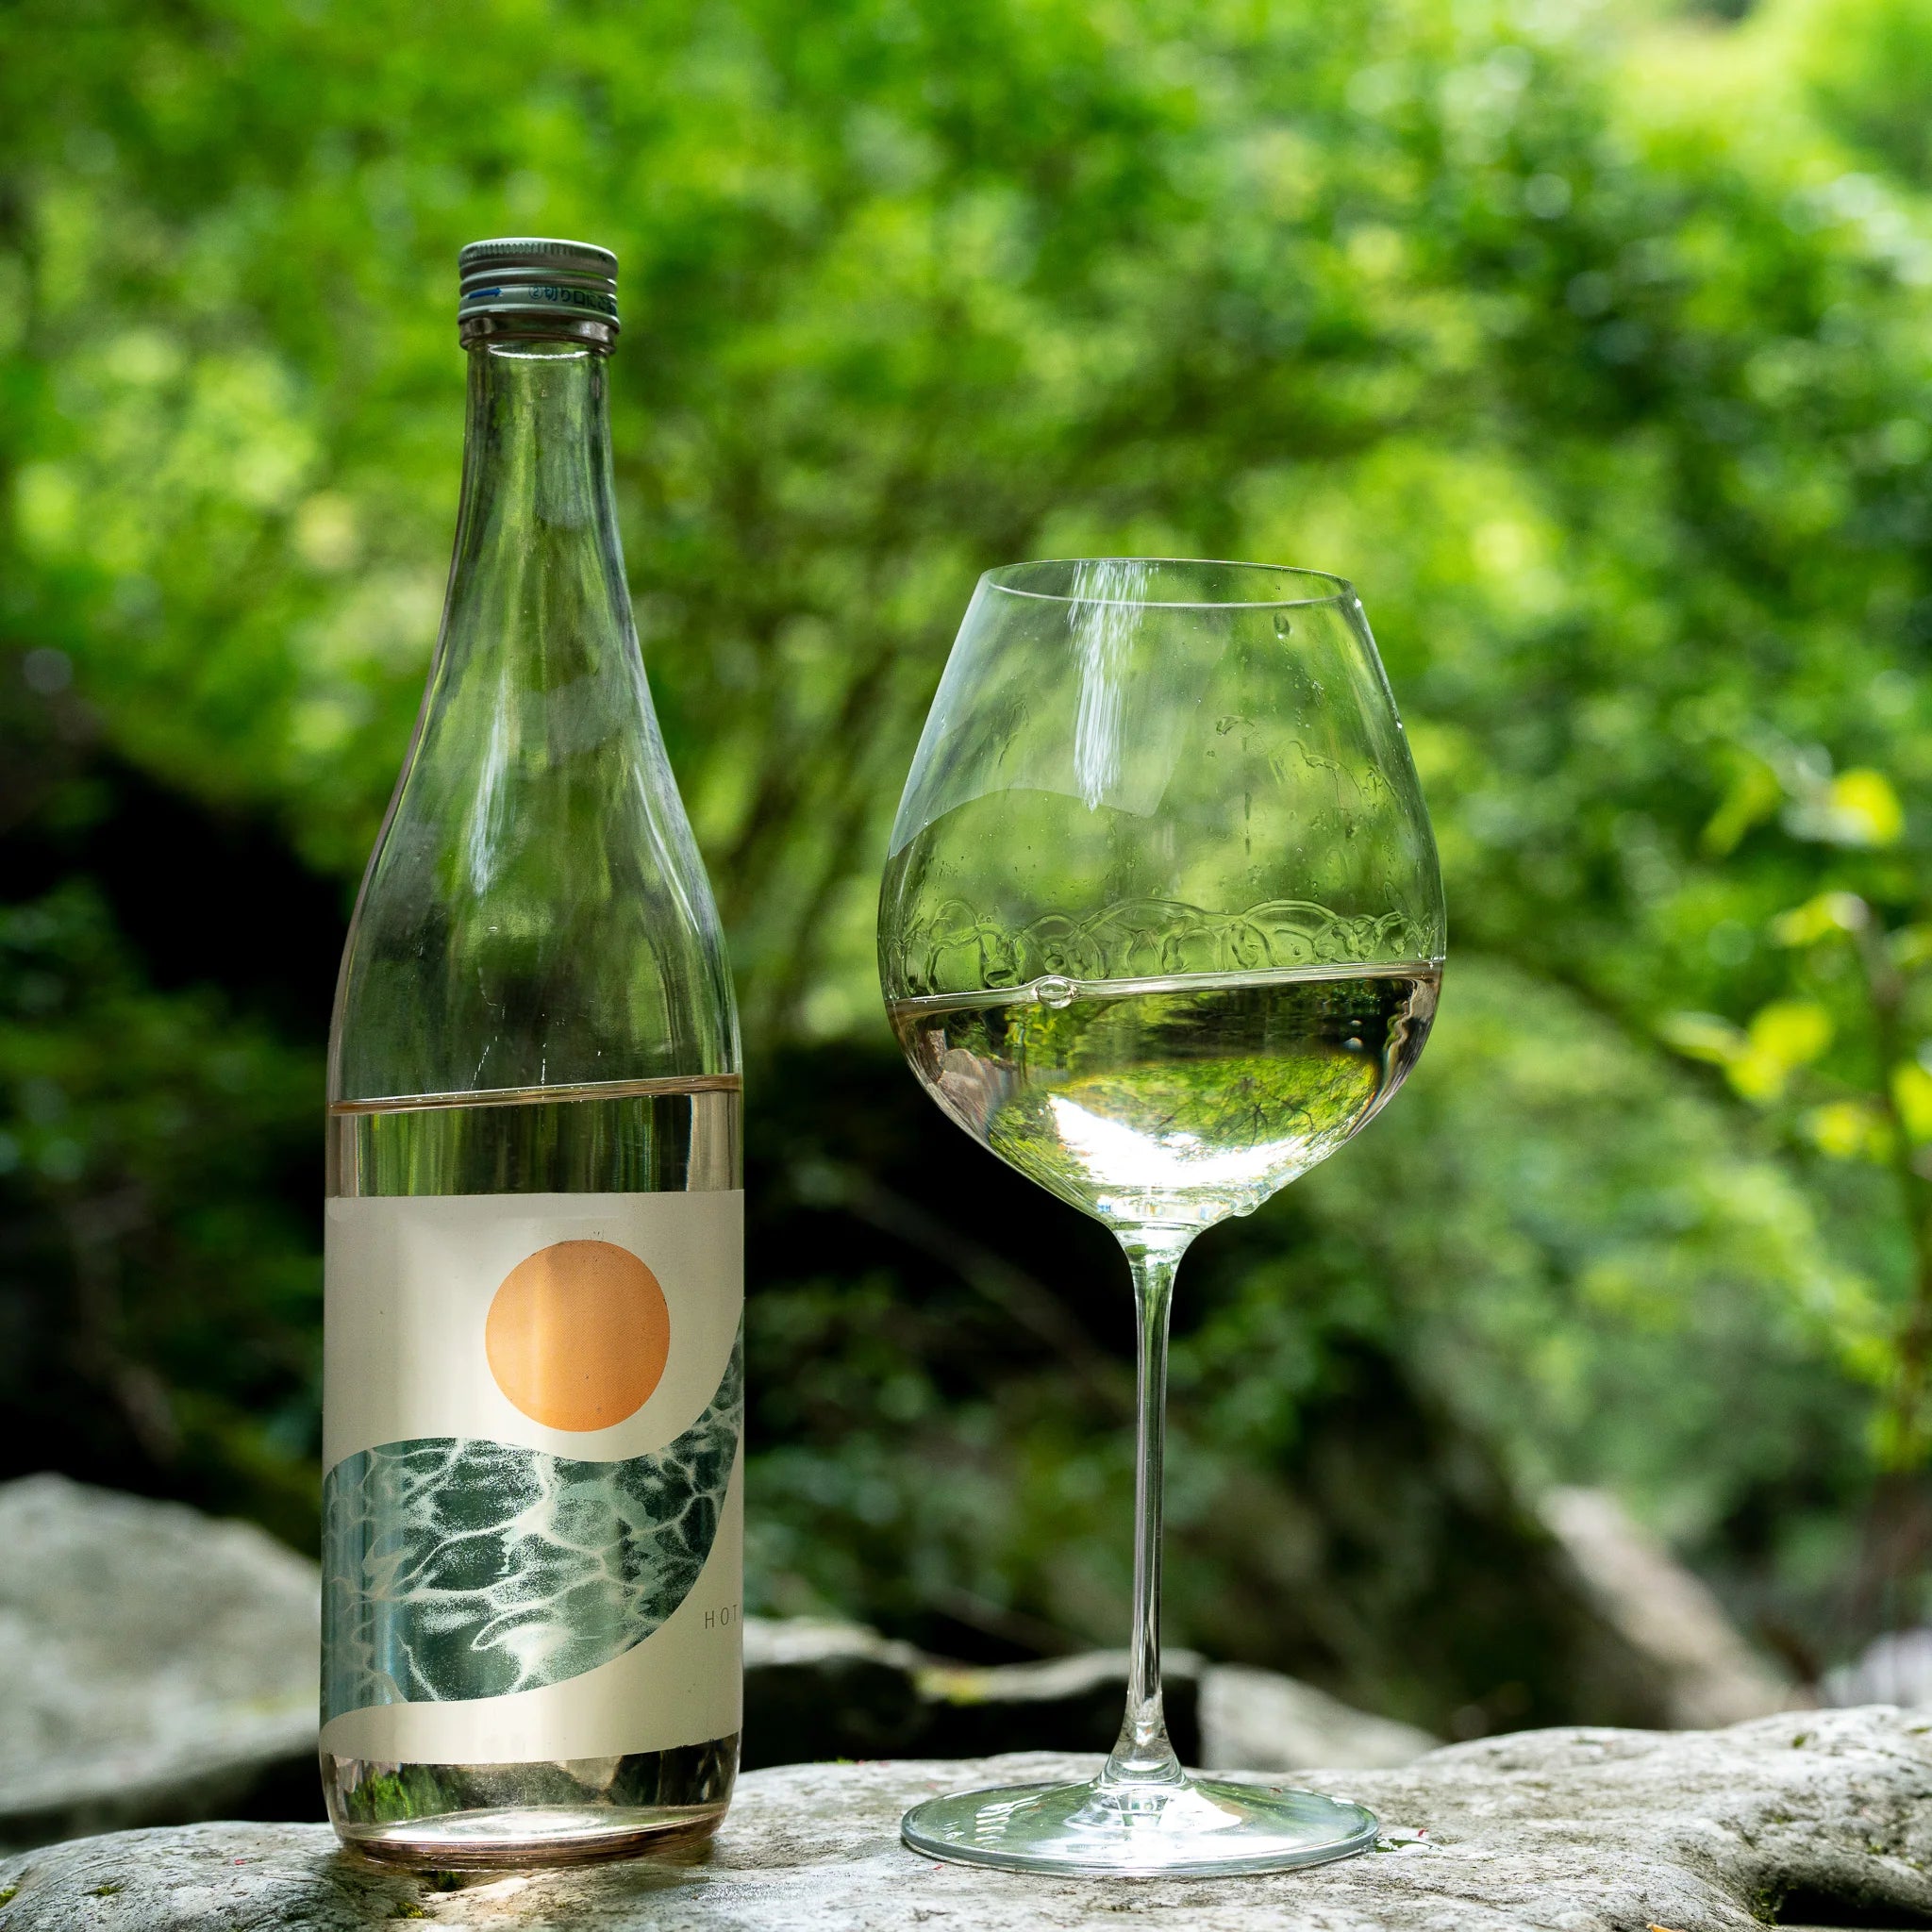 Sip authentic sake made from Mother Nature